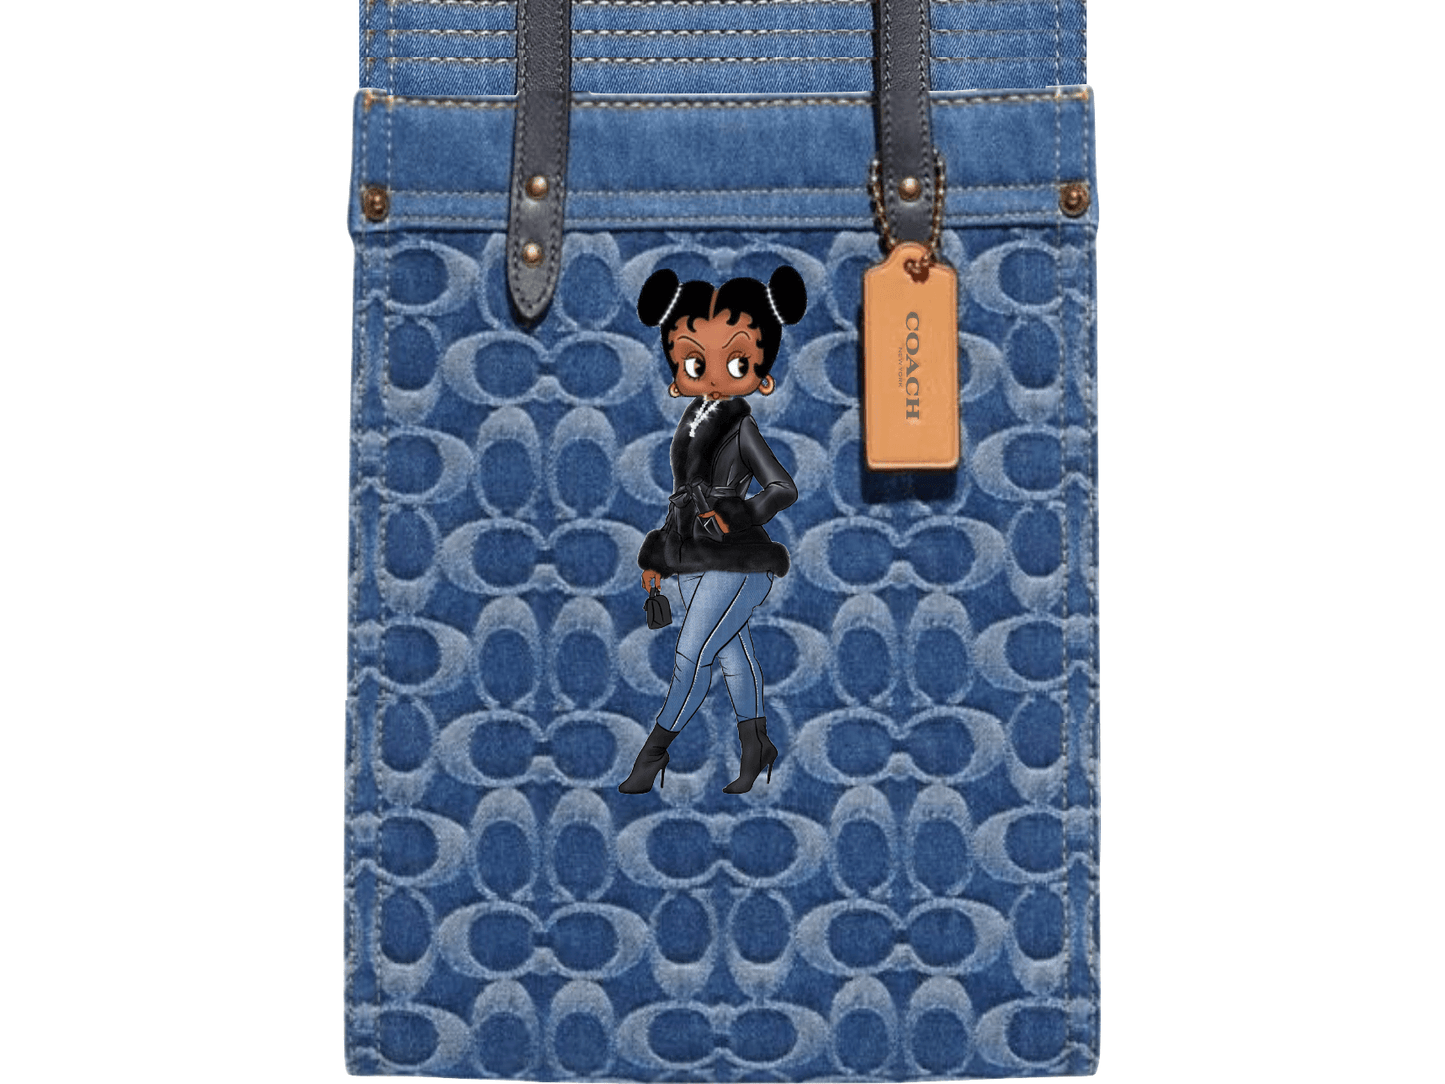 Purse Inspired Lunch Tote, Coaster and Tumbler Set